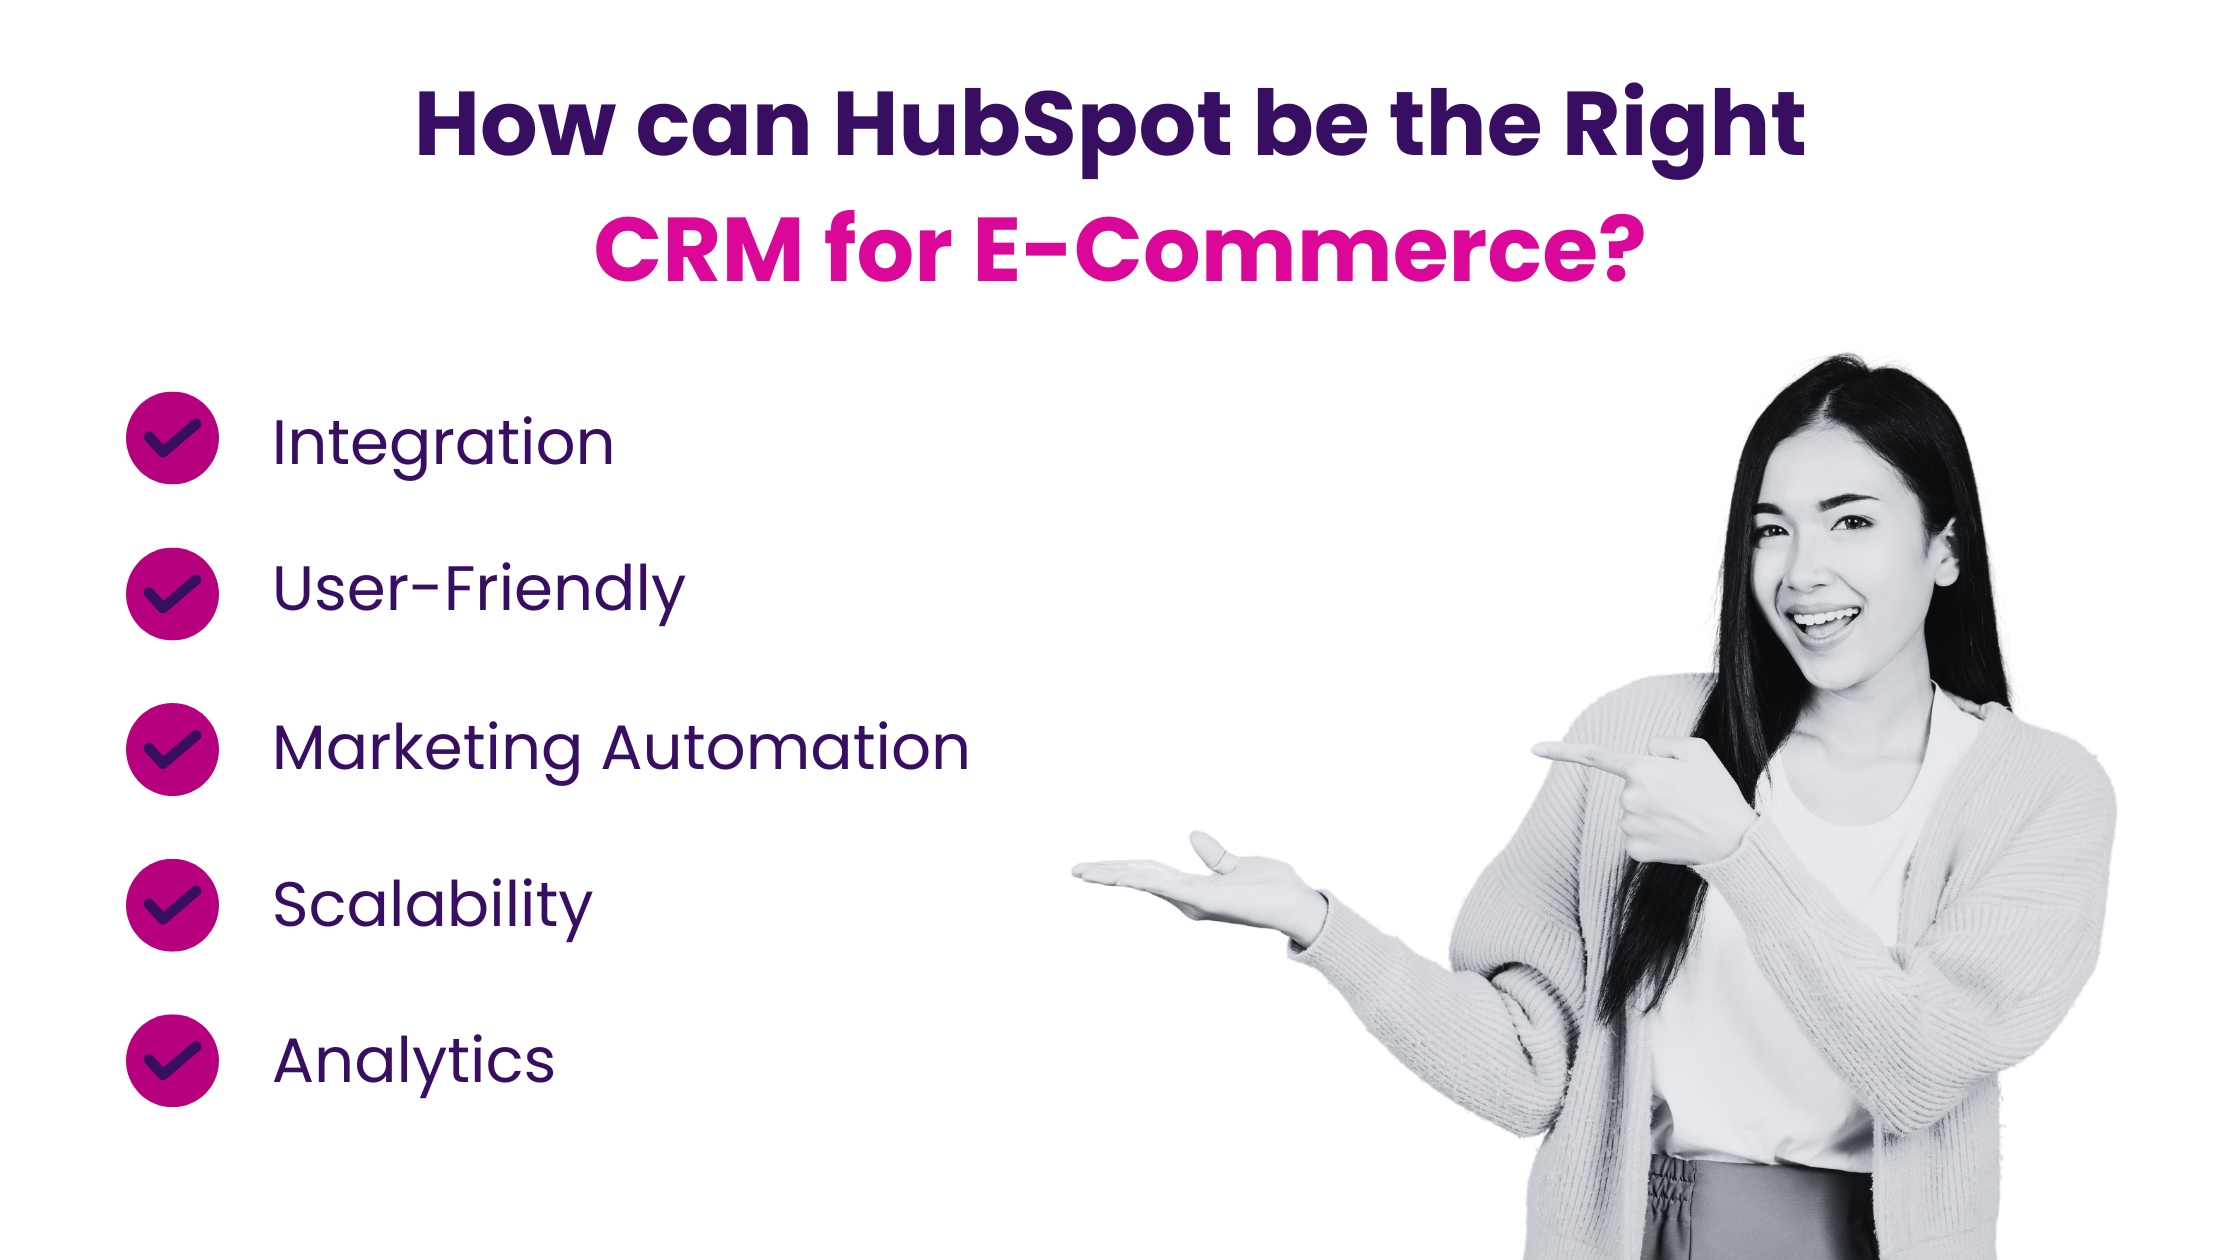 How can HubSpot be the Right CRM for E-Commerce